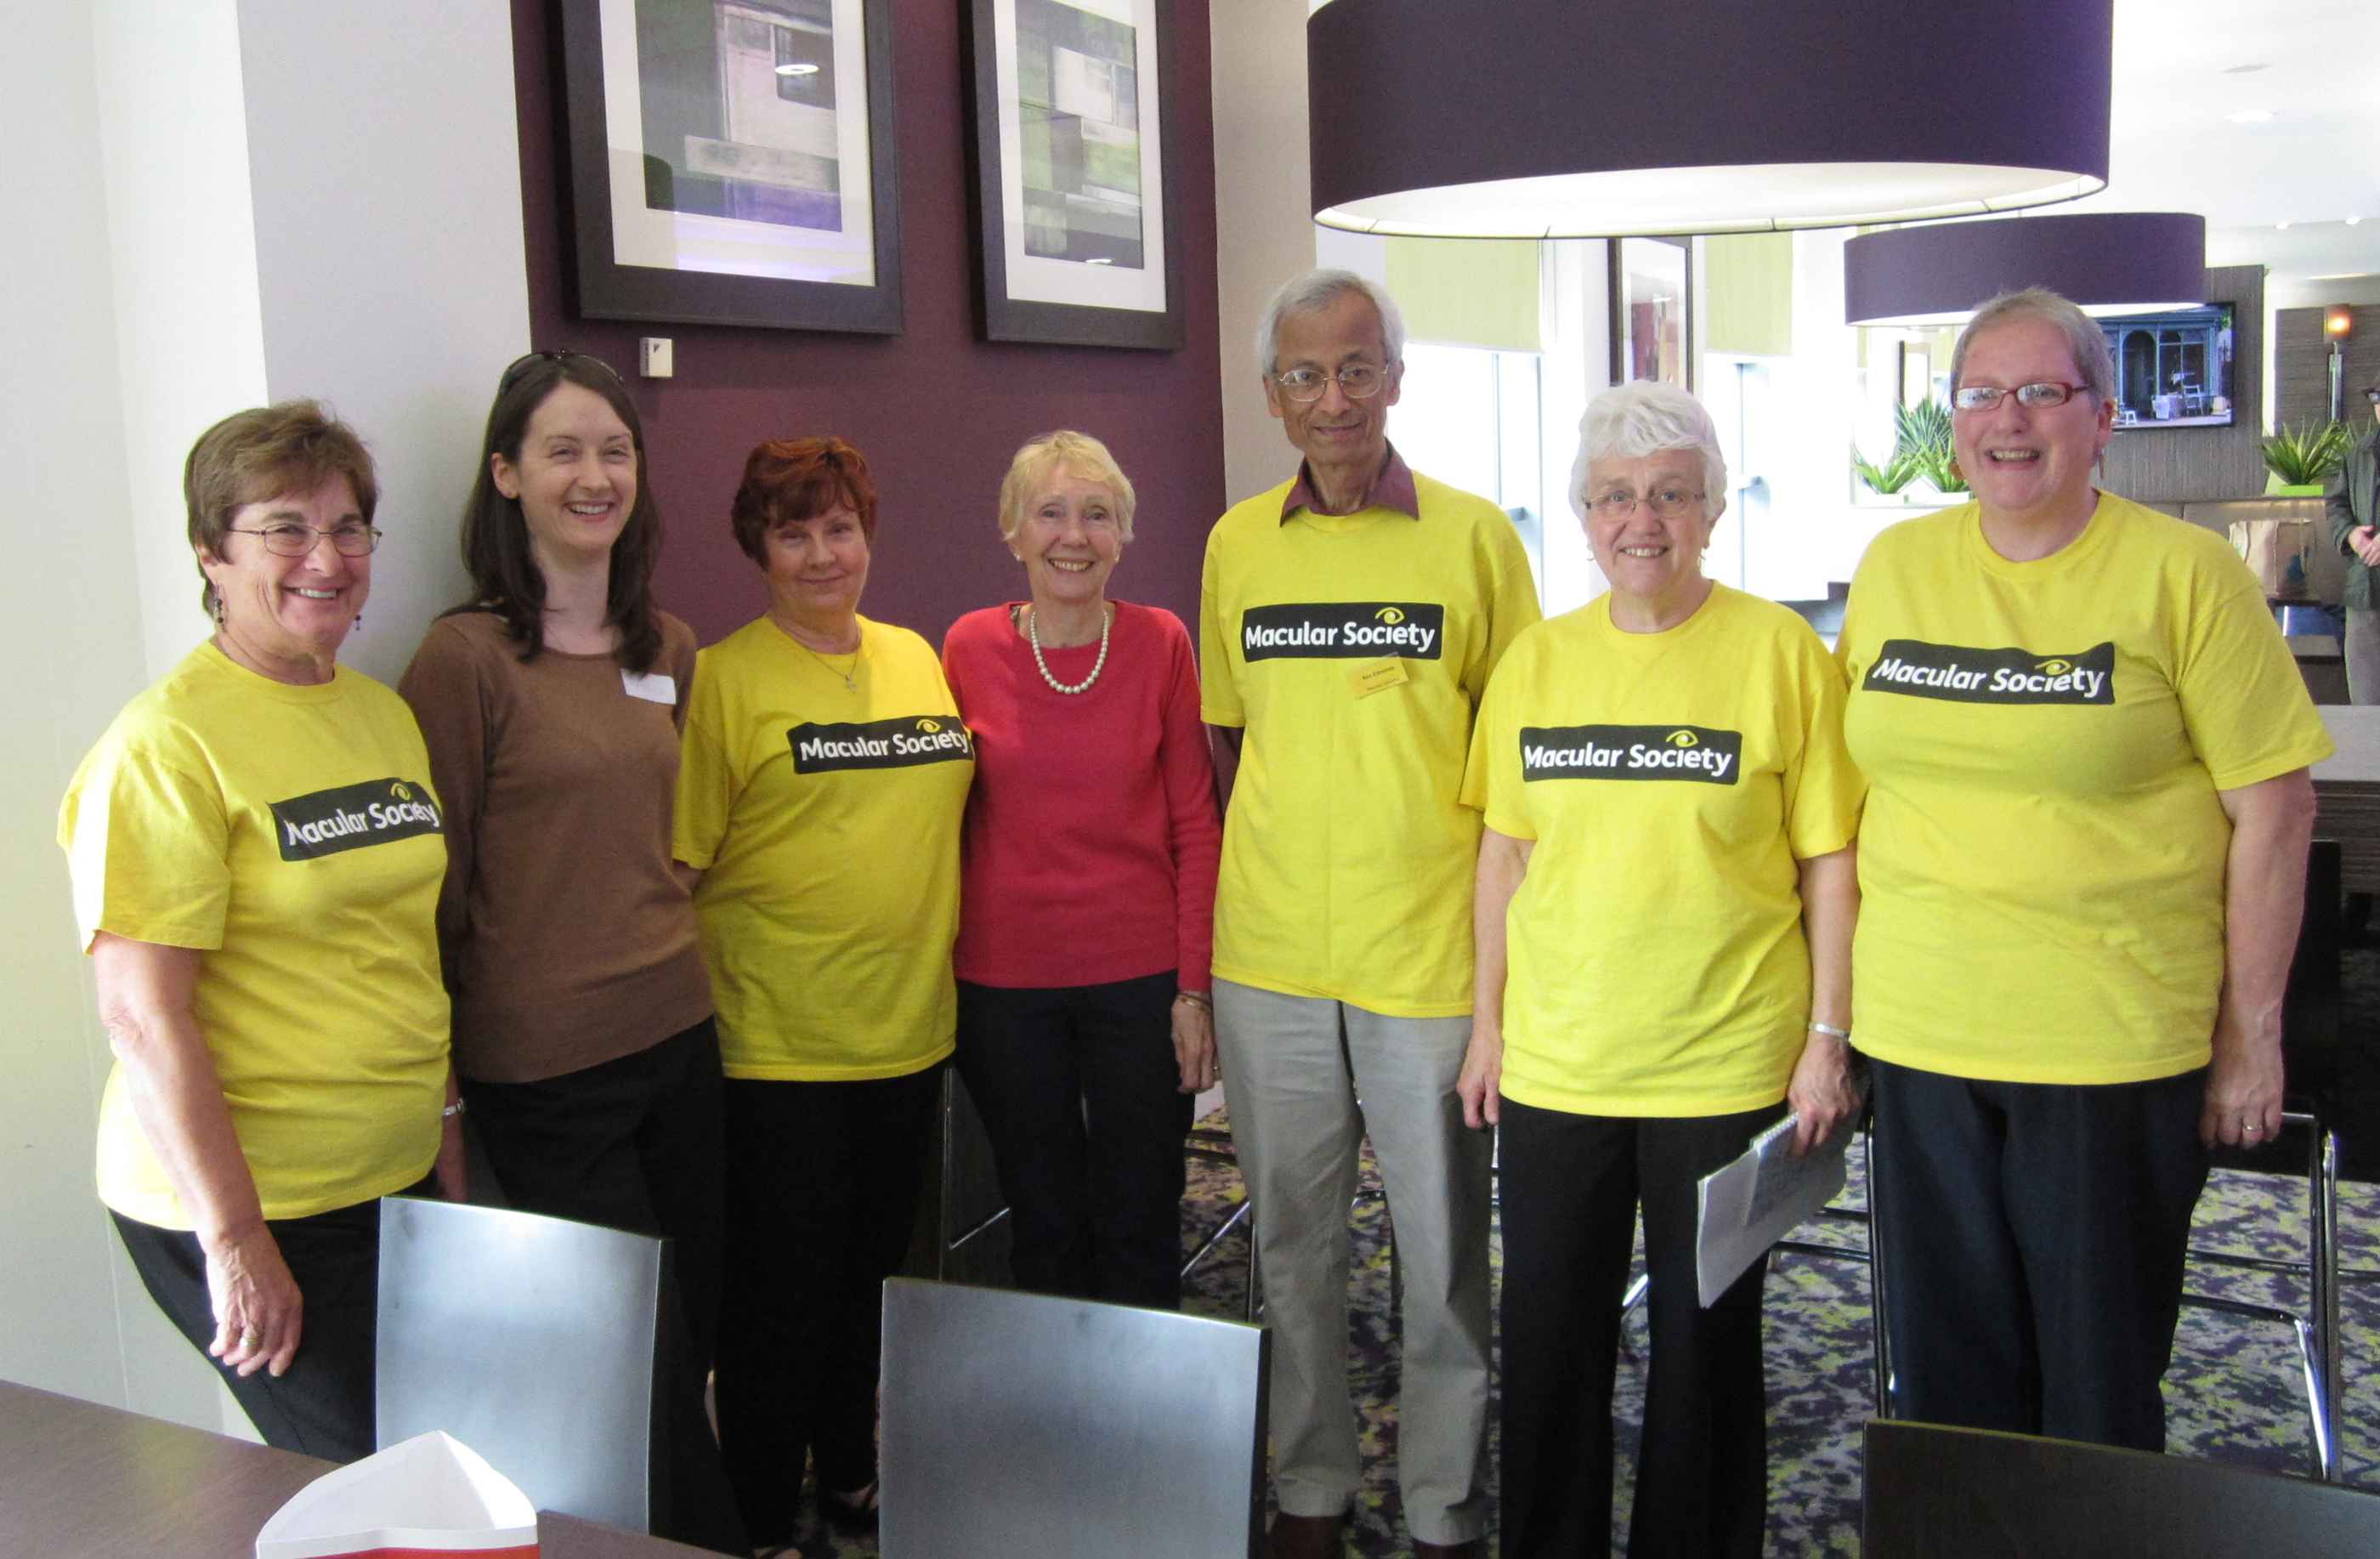 Group picture of some volunteers in yellow t-shirts